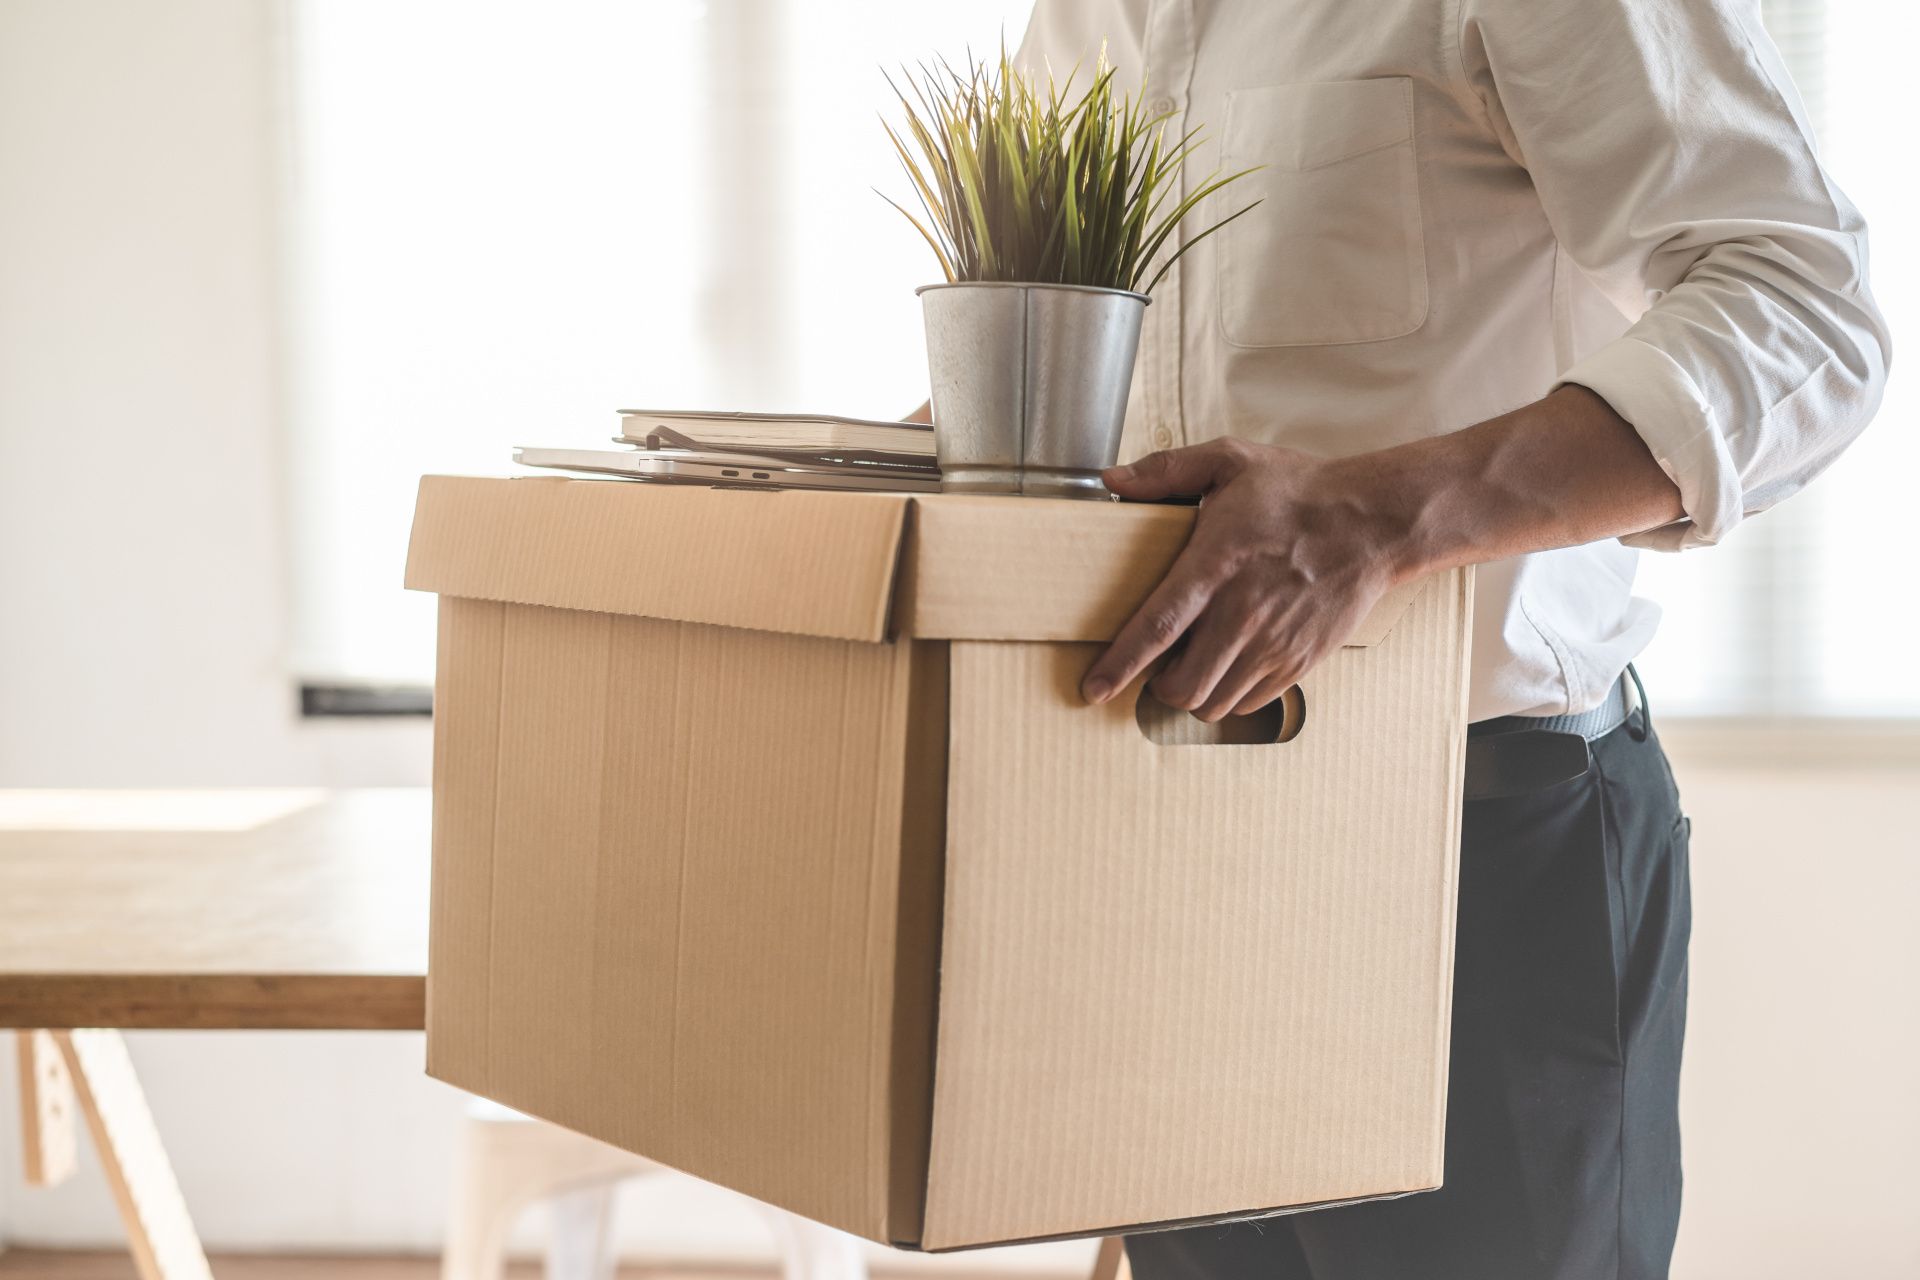 person carrying box and belongings out of office to downsize